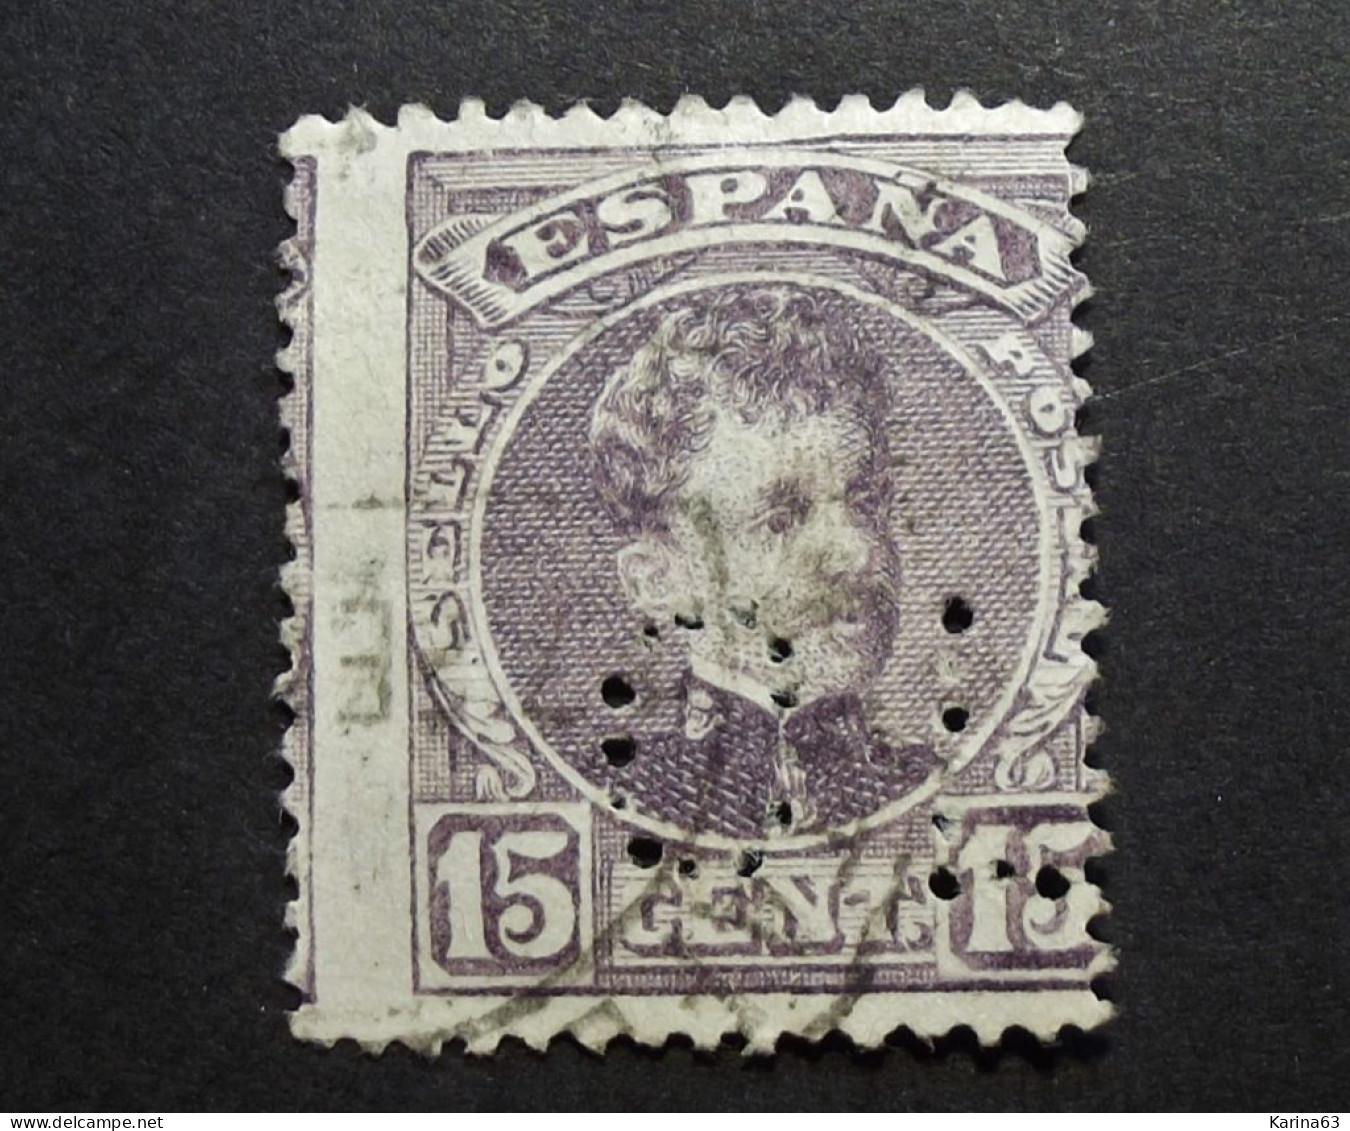 Espana - Spain - Alfonso XIII -  Perfin - Lochung  With Number - C L - Credito Lyones - Cancelled - Used Stamps